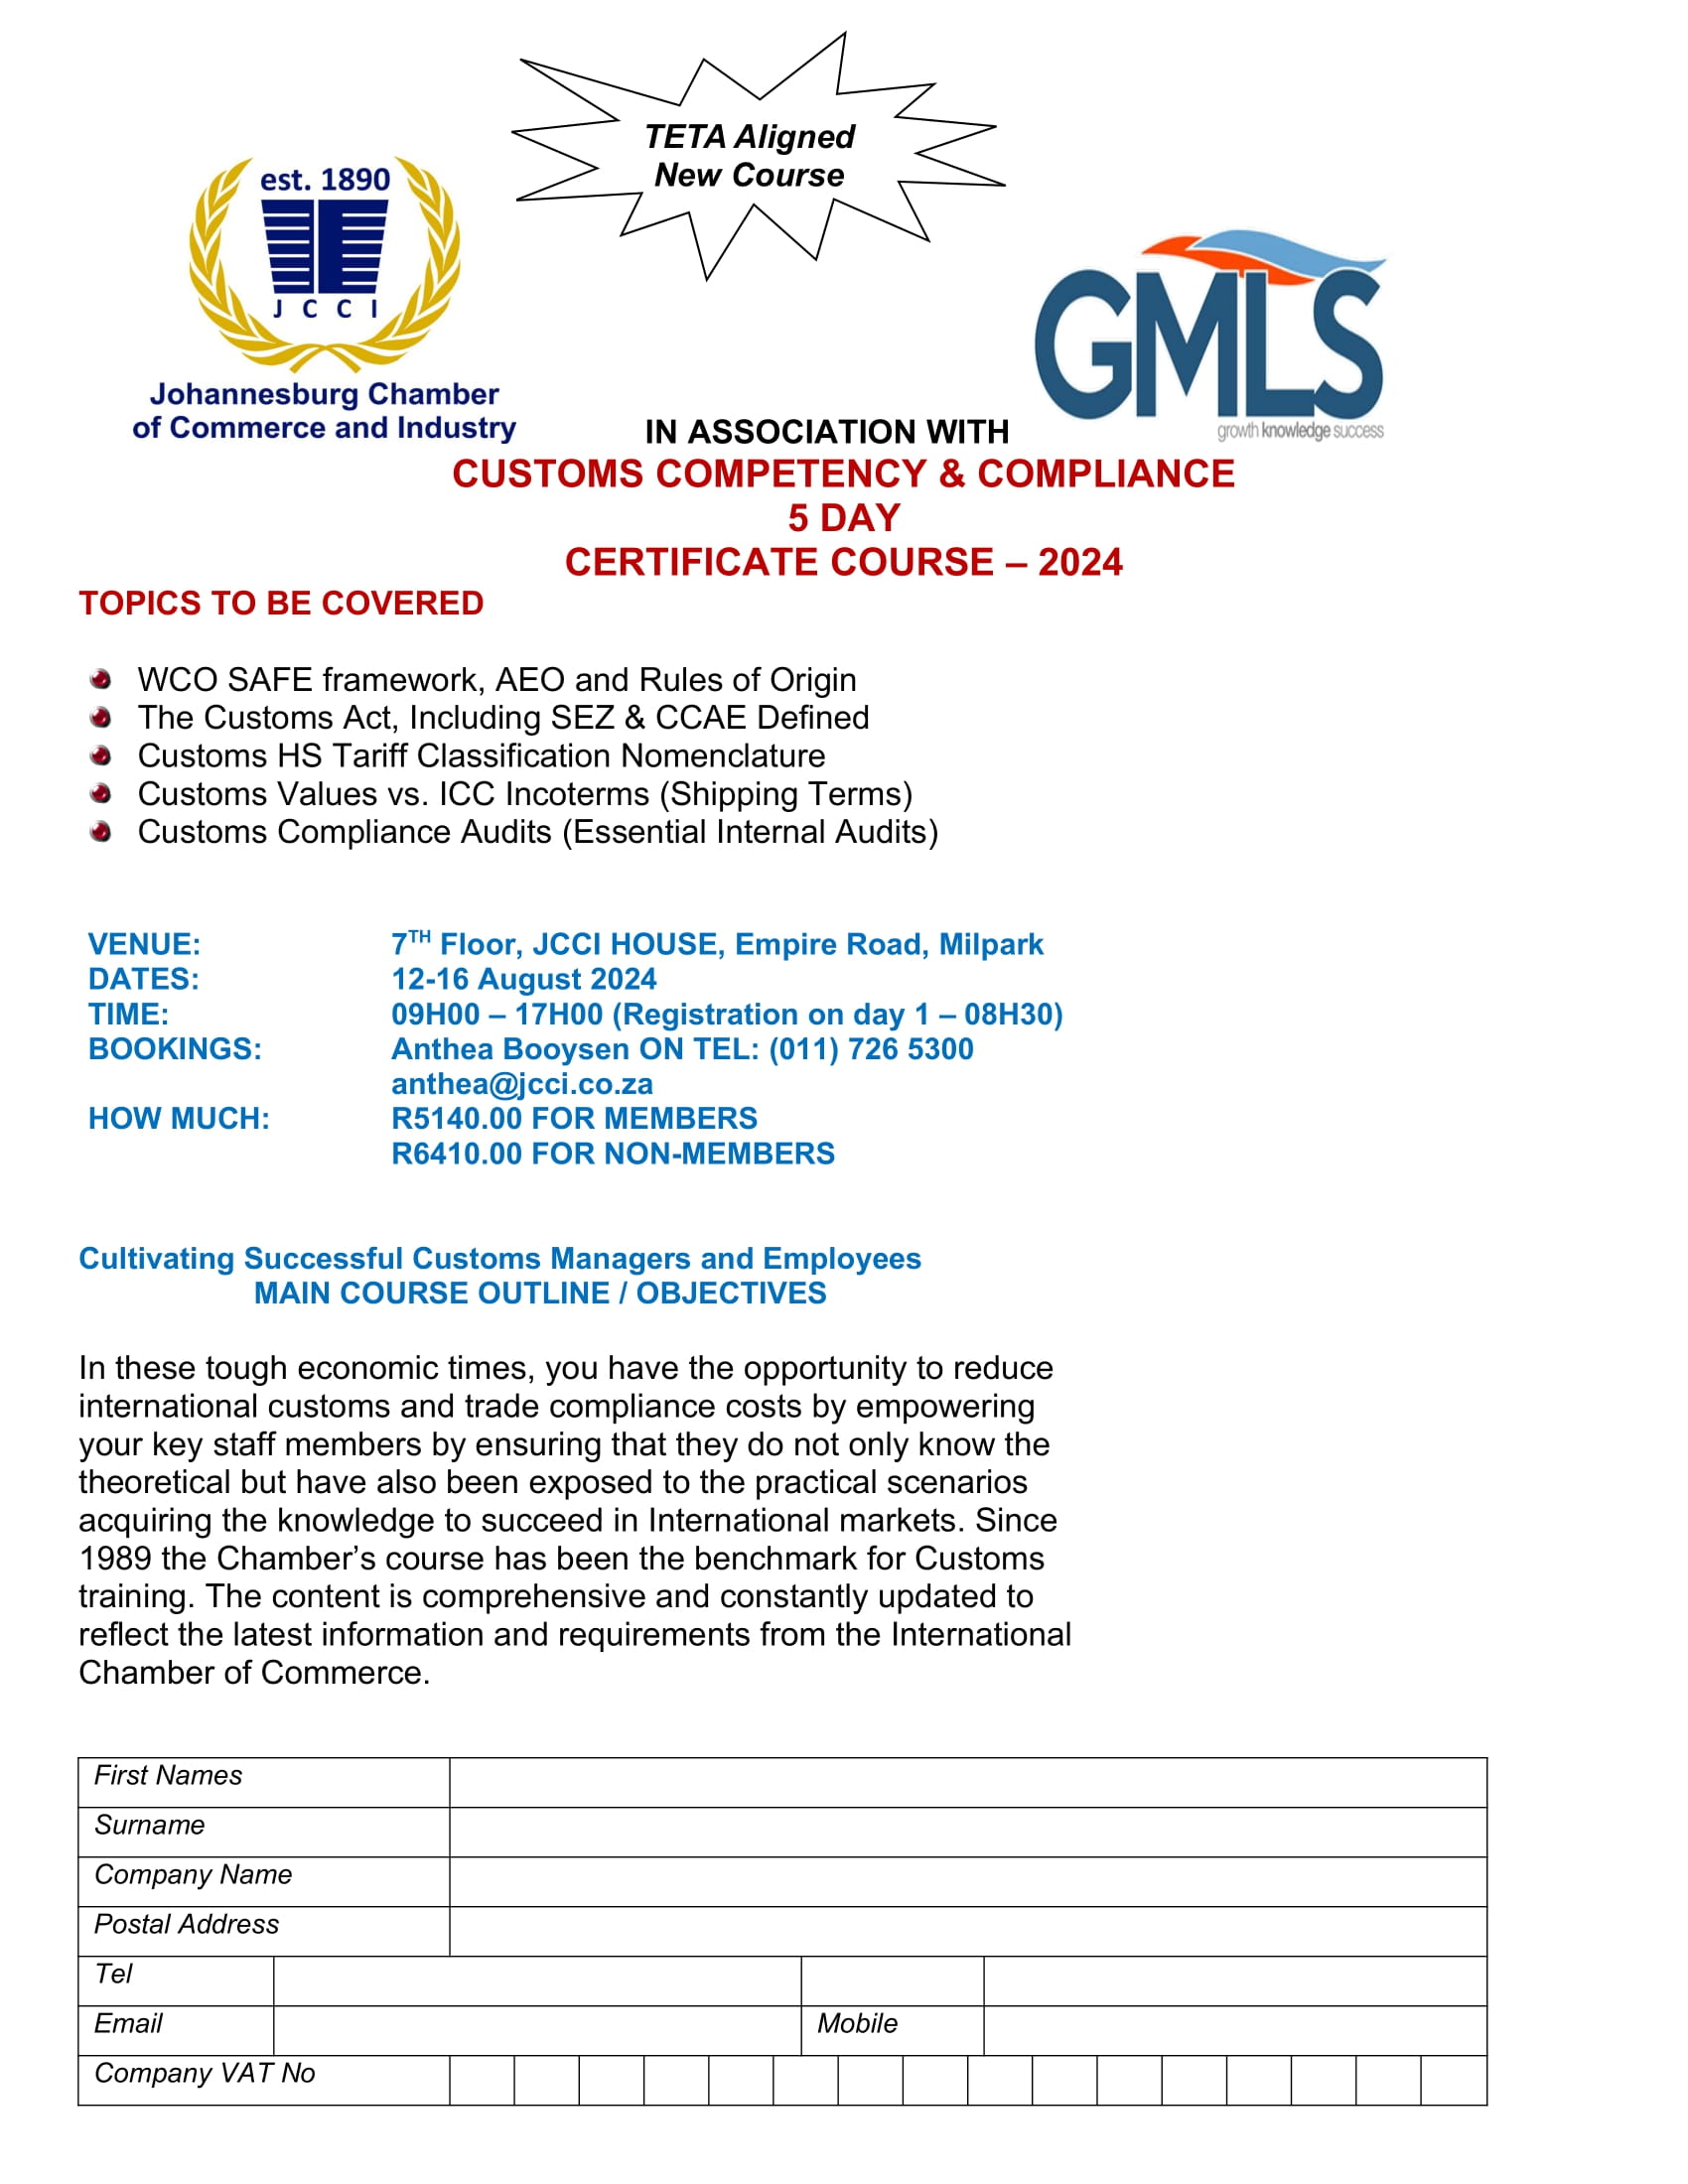 CUSTOMS COMPETENCY & COMPLIANCE 5 DAY CERTIFICATE COURSE – 12 - 16 AUGUST 2024